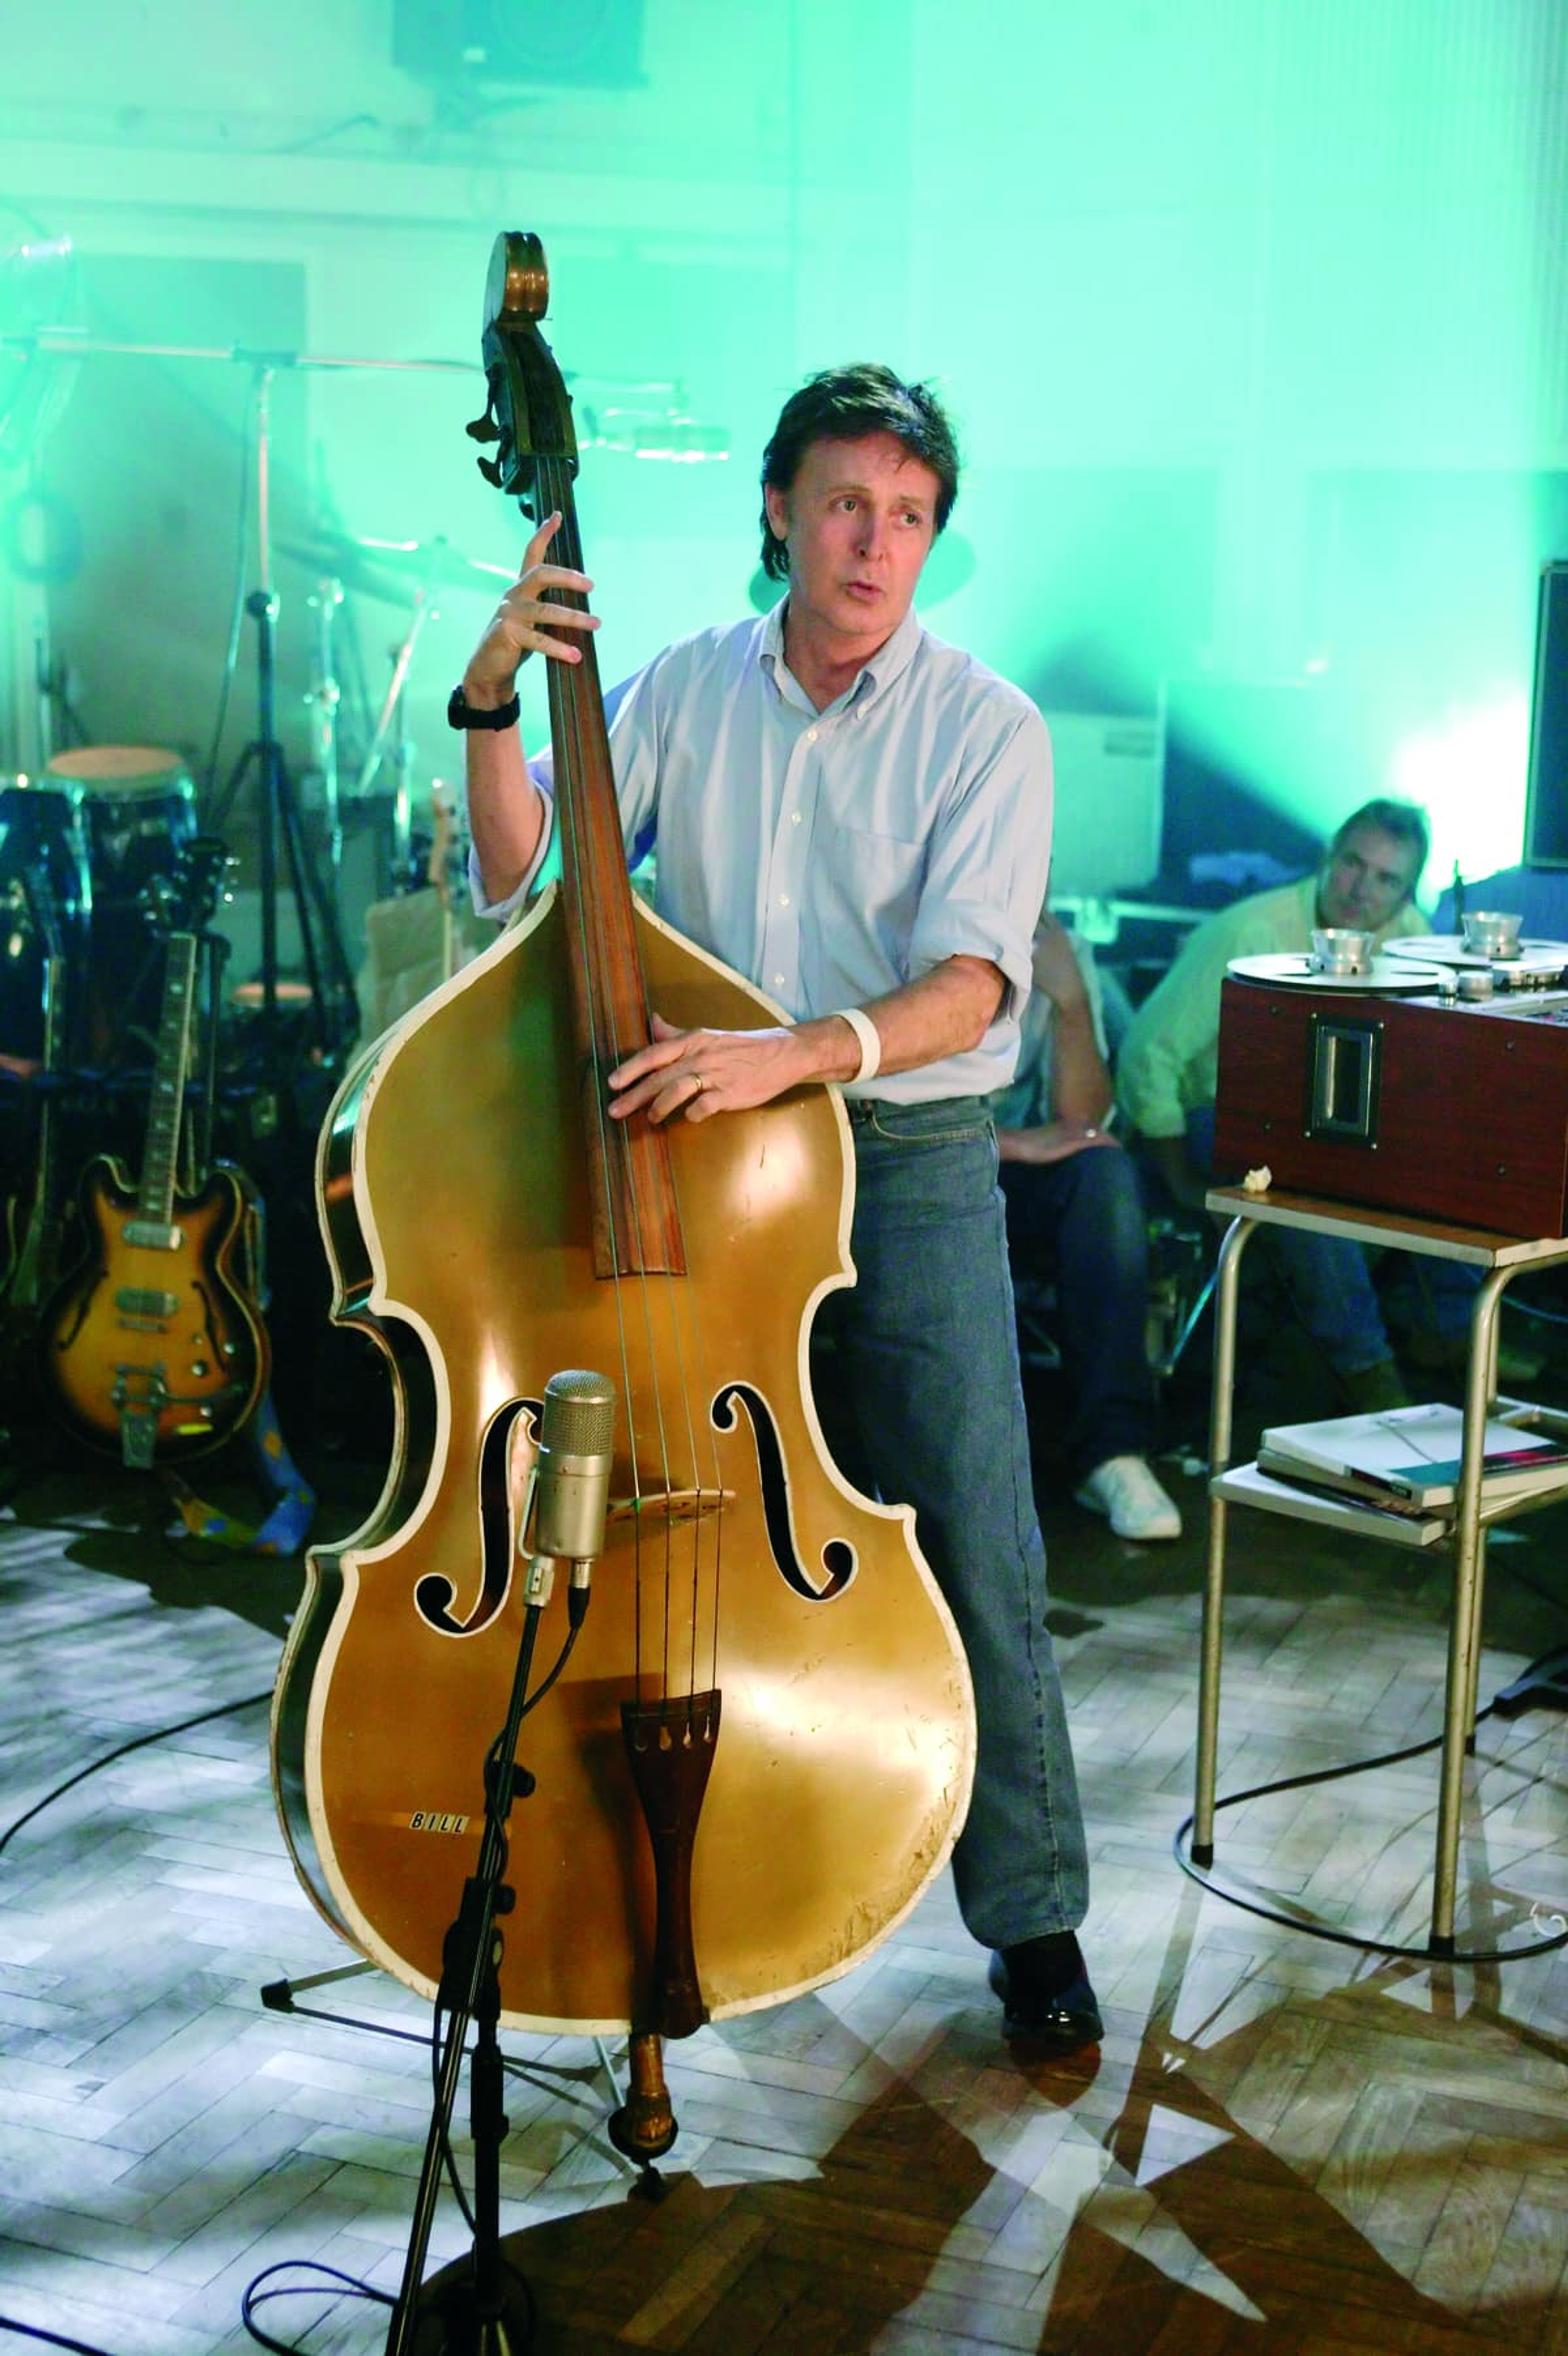 Paul playing a double bass